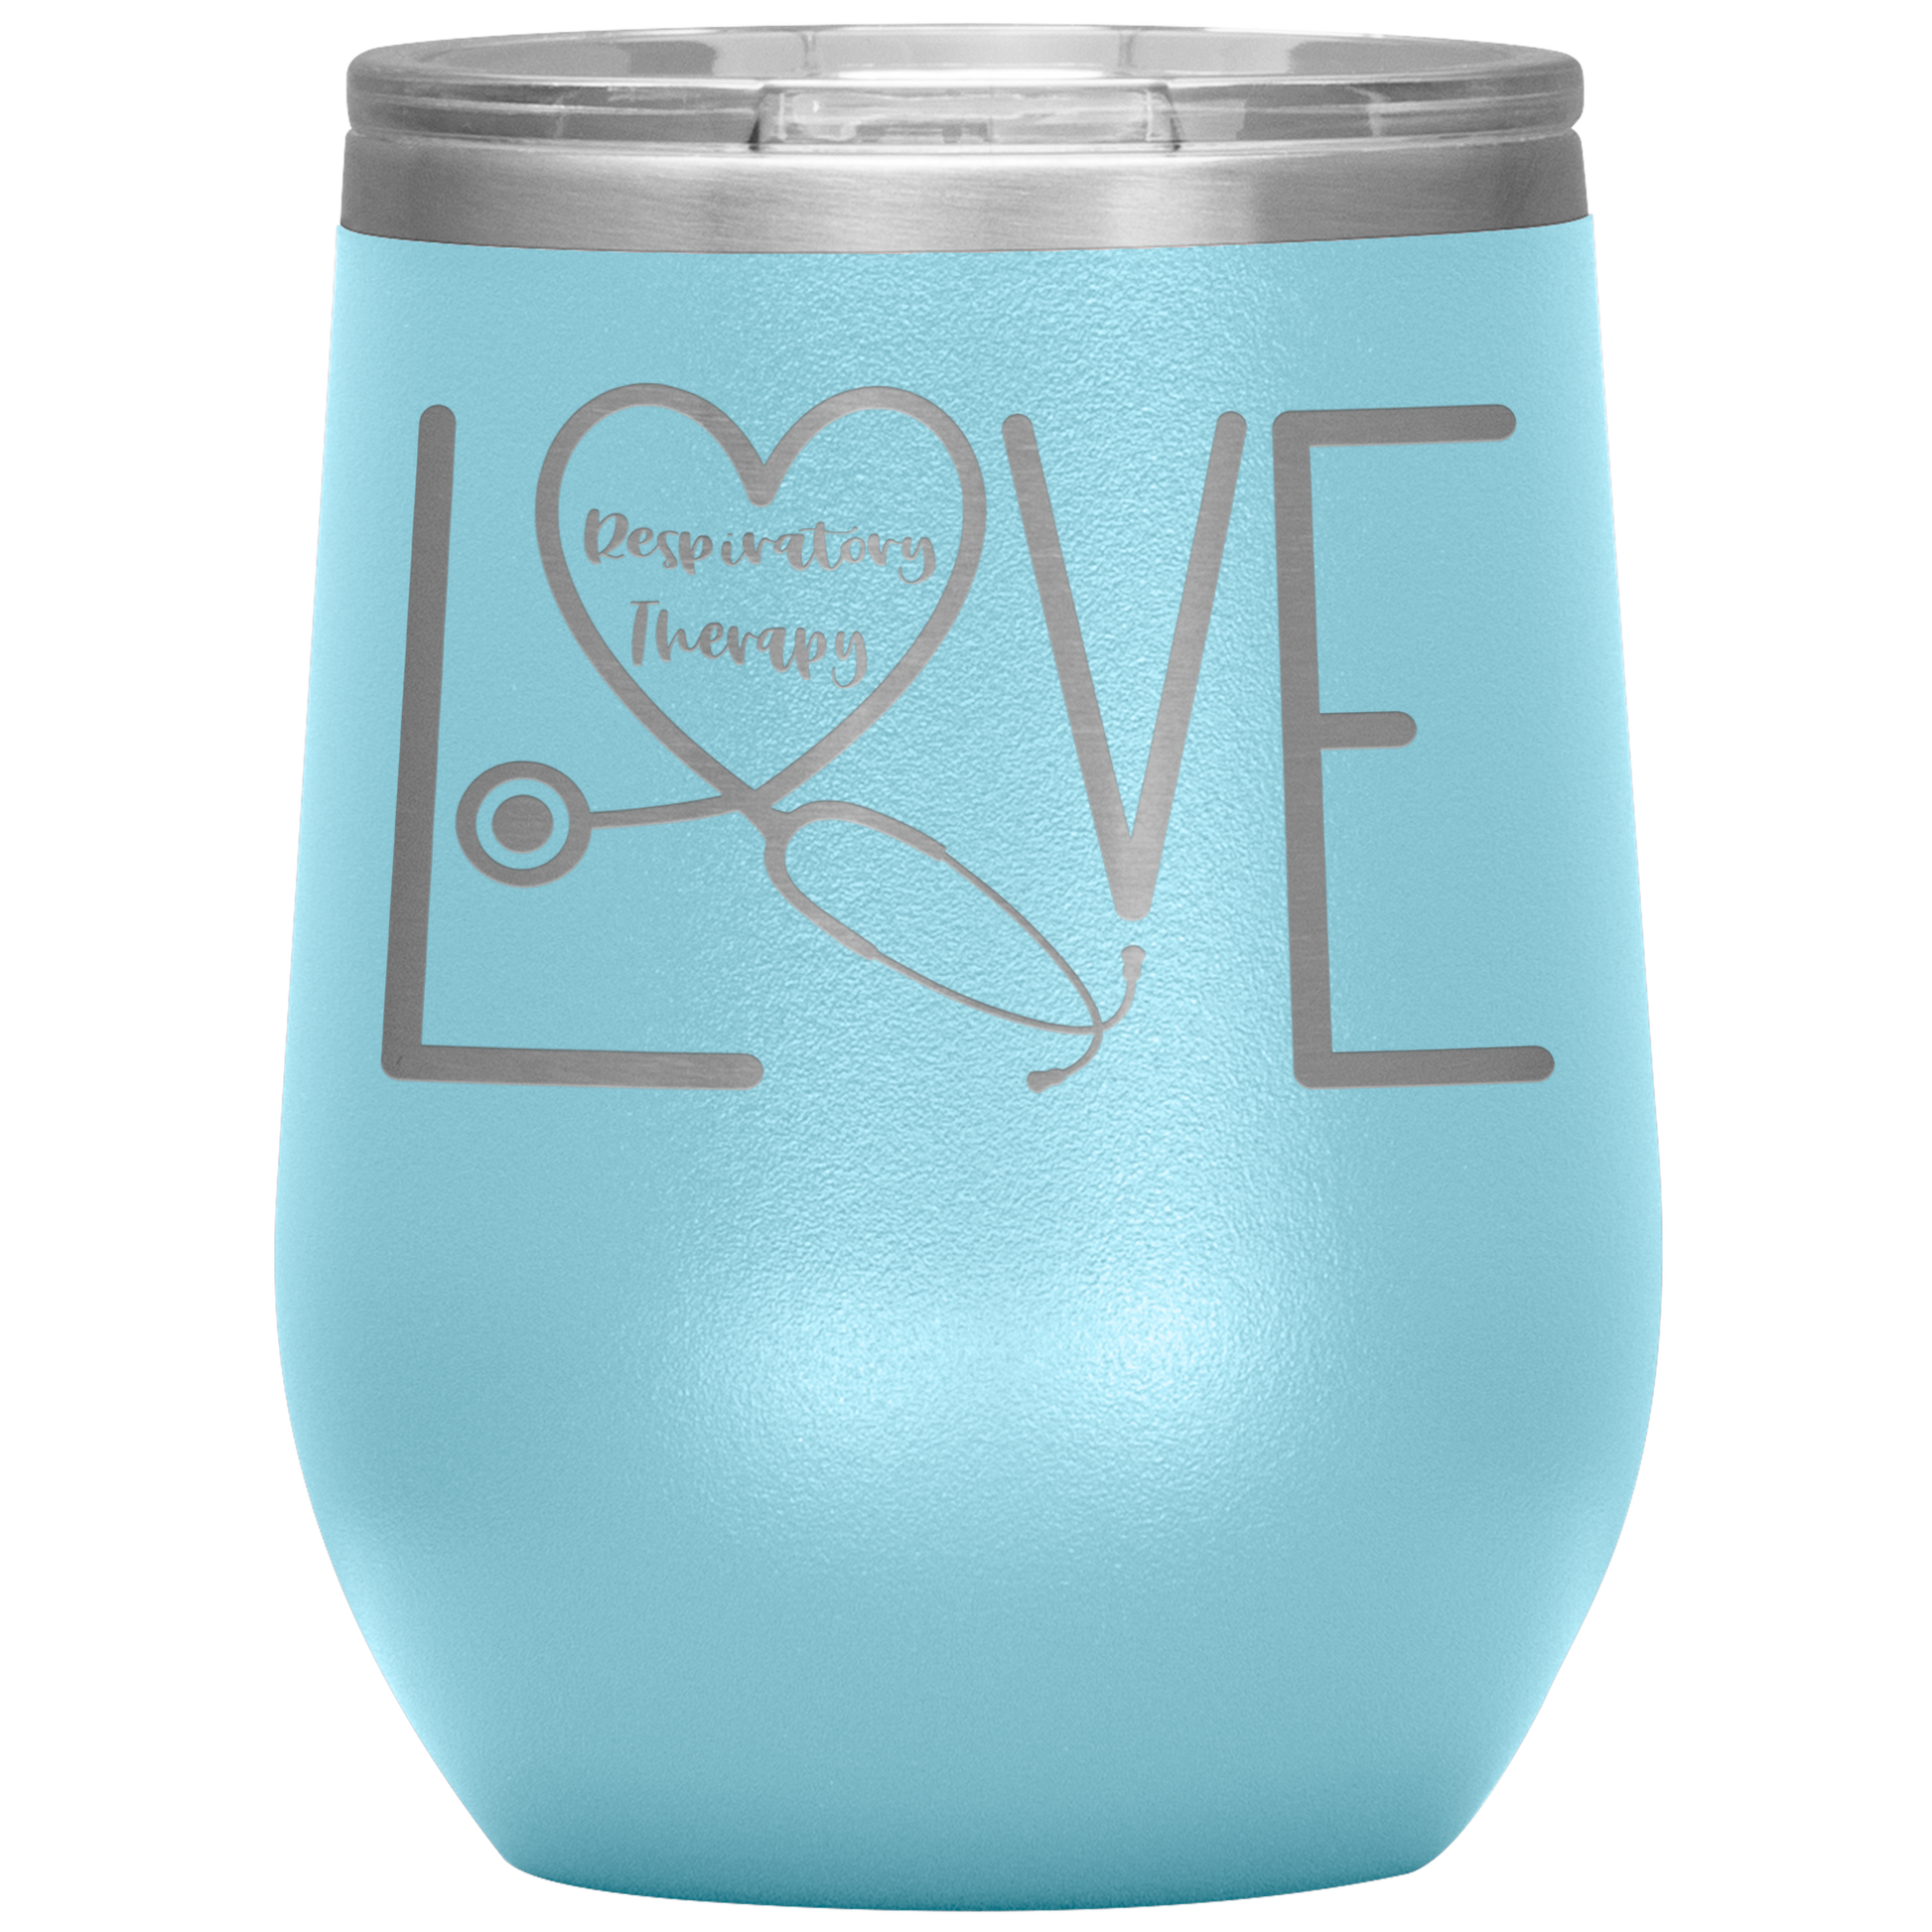 RT Swagger | Respiratory Therapy Love 12 oz Wine Tumbler-Wine Tumbler-TD Gift Solutions.com